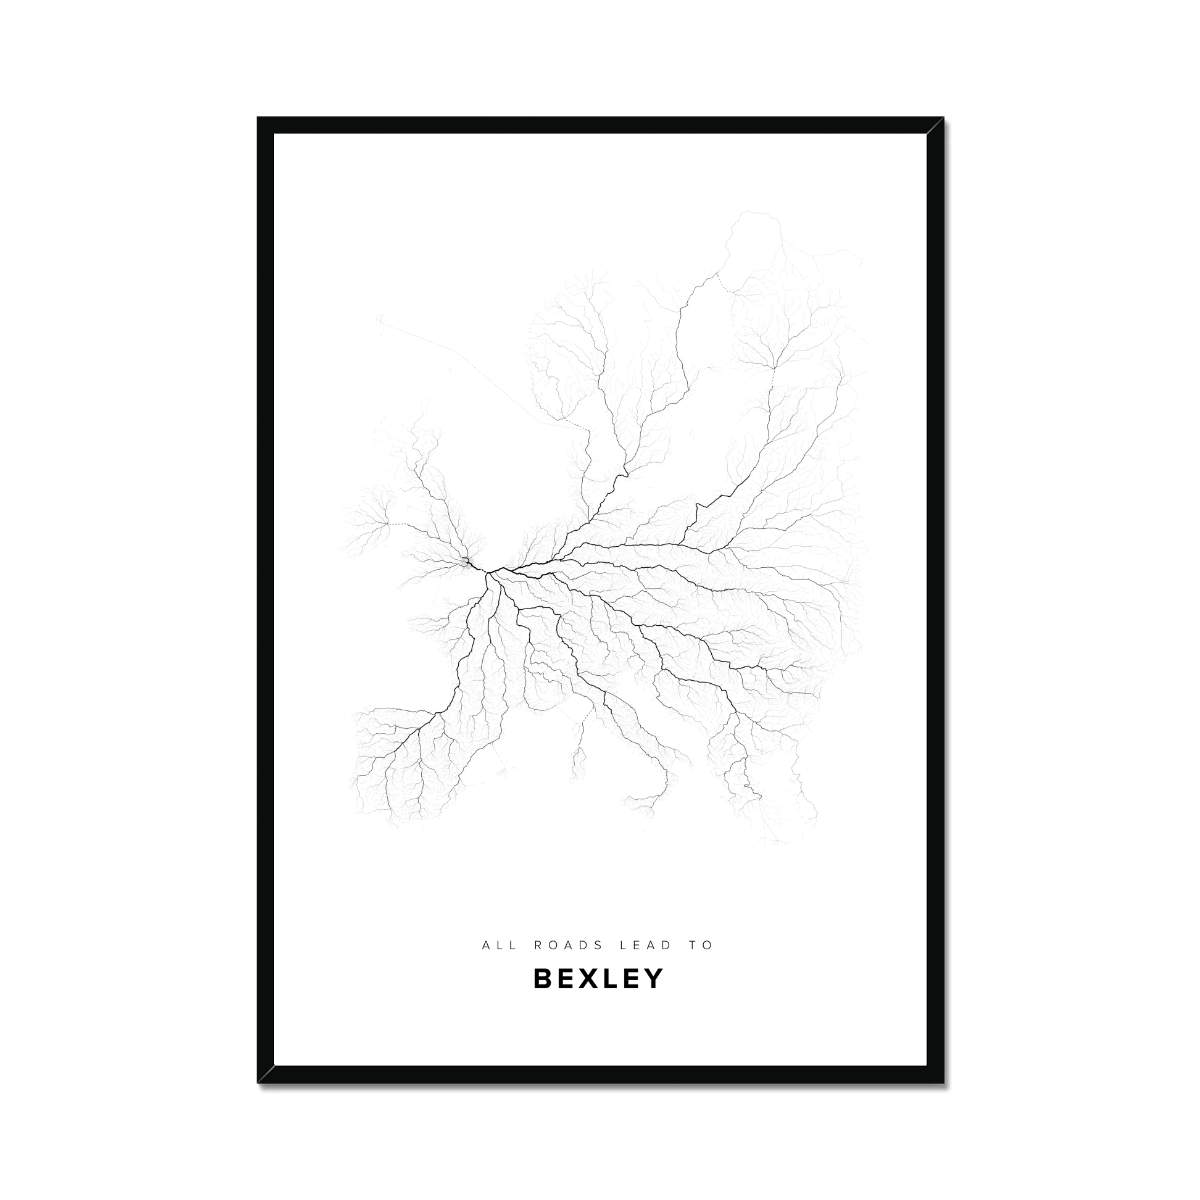 All roads lead to Bexley (United Kingdom of Great Britain and Northern Ireland) Fine Art Map Print